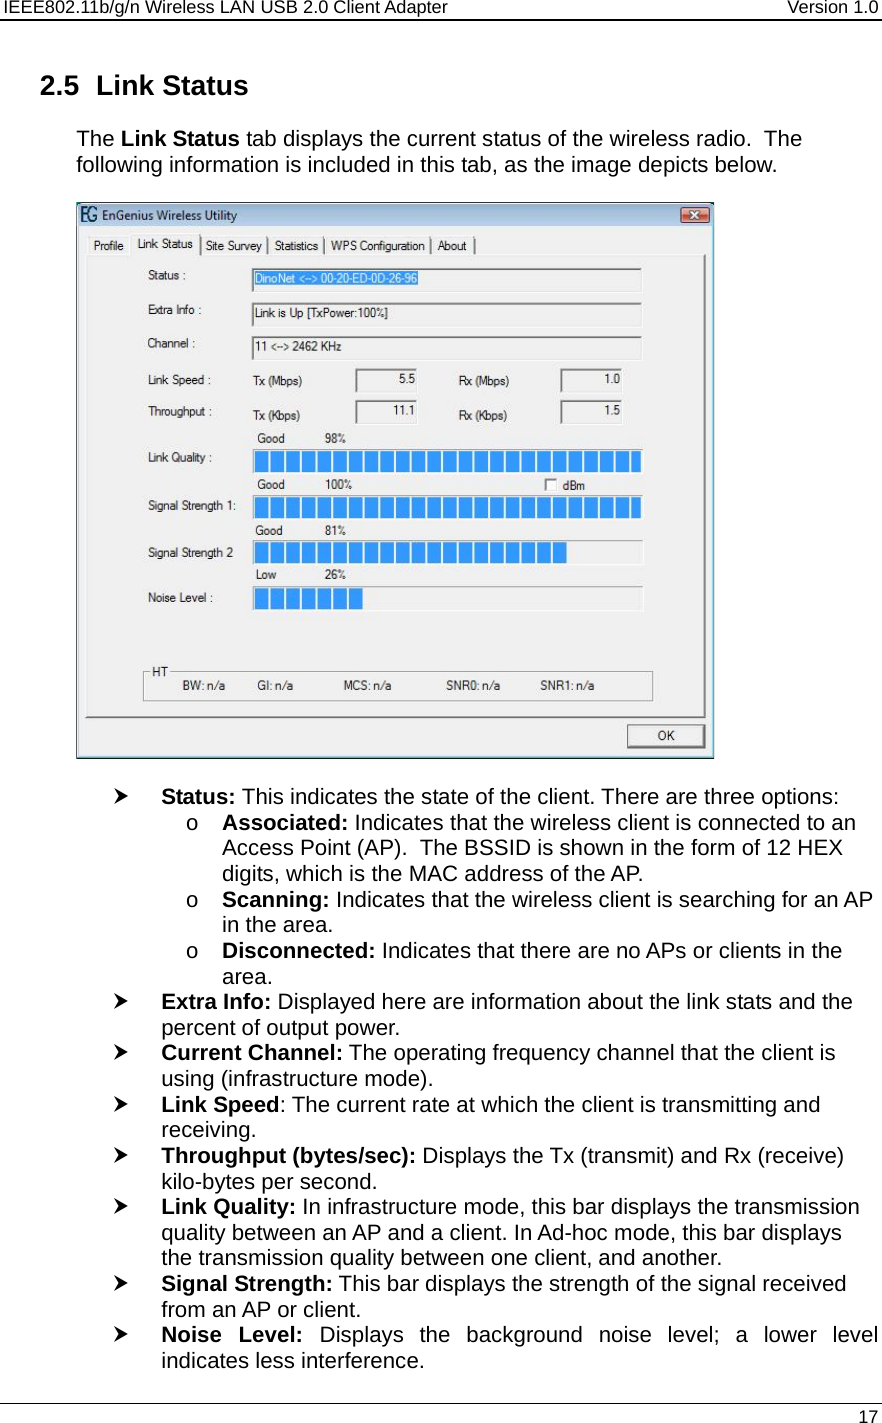 IEEE802.11b/g/n Wireless LAN USB 2.0 Client Adapter  Version 1.0   17  2.5 Link Status The Link Status tab displays the current status of the wireless radio.  The following information is included in this tab, as the image depicts below.    h Status: This indicates the state of the client. There are three options: o Associated: Indicates that the wireless client is connected to an Access Point (AP).  The BSSID is shown in the form of 12 HEX digits, which is the MAC address of the AP. o Scanning: Indicates that the wireless client is searching for an AP in the area. o Disconnected: Indicates that there are no APs or clients in the area.  h Extra Info: Displayed here are information about the link stats and the percent of output power.  h Current Channel: The operating frequency channel that the client is using (infrastructure mode).  h Link Speed: The current rate at which the client is transmitting and receiving. h Throughput (bytes/sec): Displays the Tx (transmit) and Rx (receive) kilo-bytes per second. h Link Quality: In infrastructure mode, this bar displays the transmission quality between an AP and a client. In Ad-hoc mode, this bar displays the transmission quality between one client, and another. h Signal Strength: This bar displays the strength of the signal received from an AP or client. h Noise Level: Displays the background noise level; a lower level indicates less interference.  